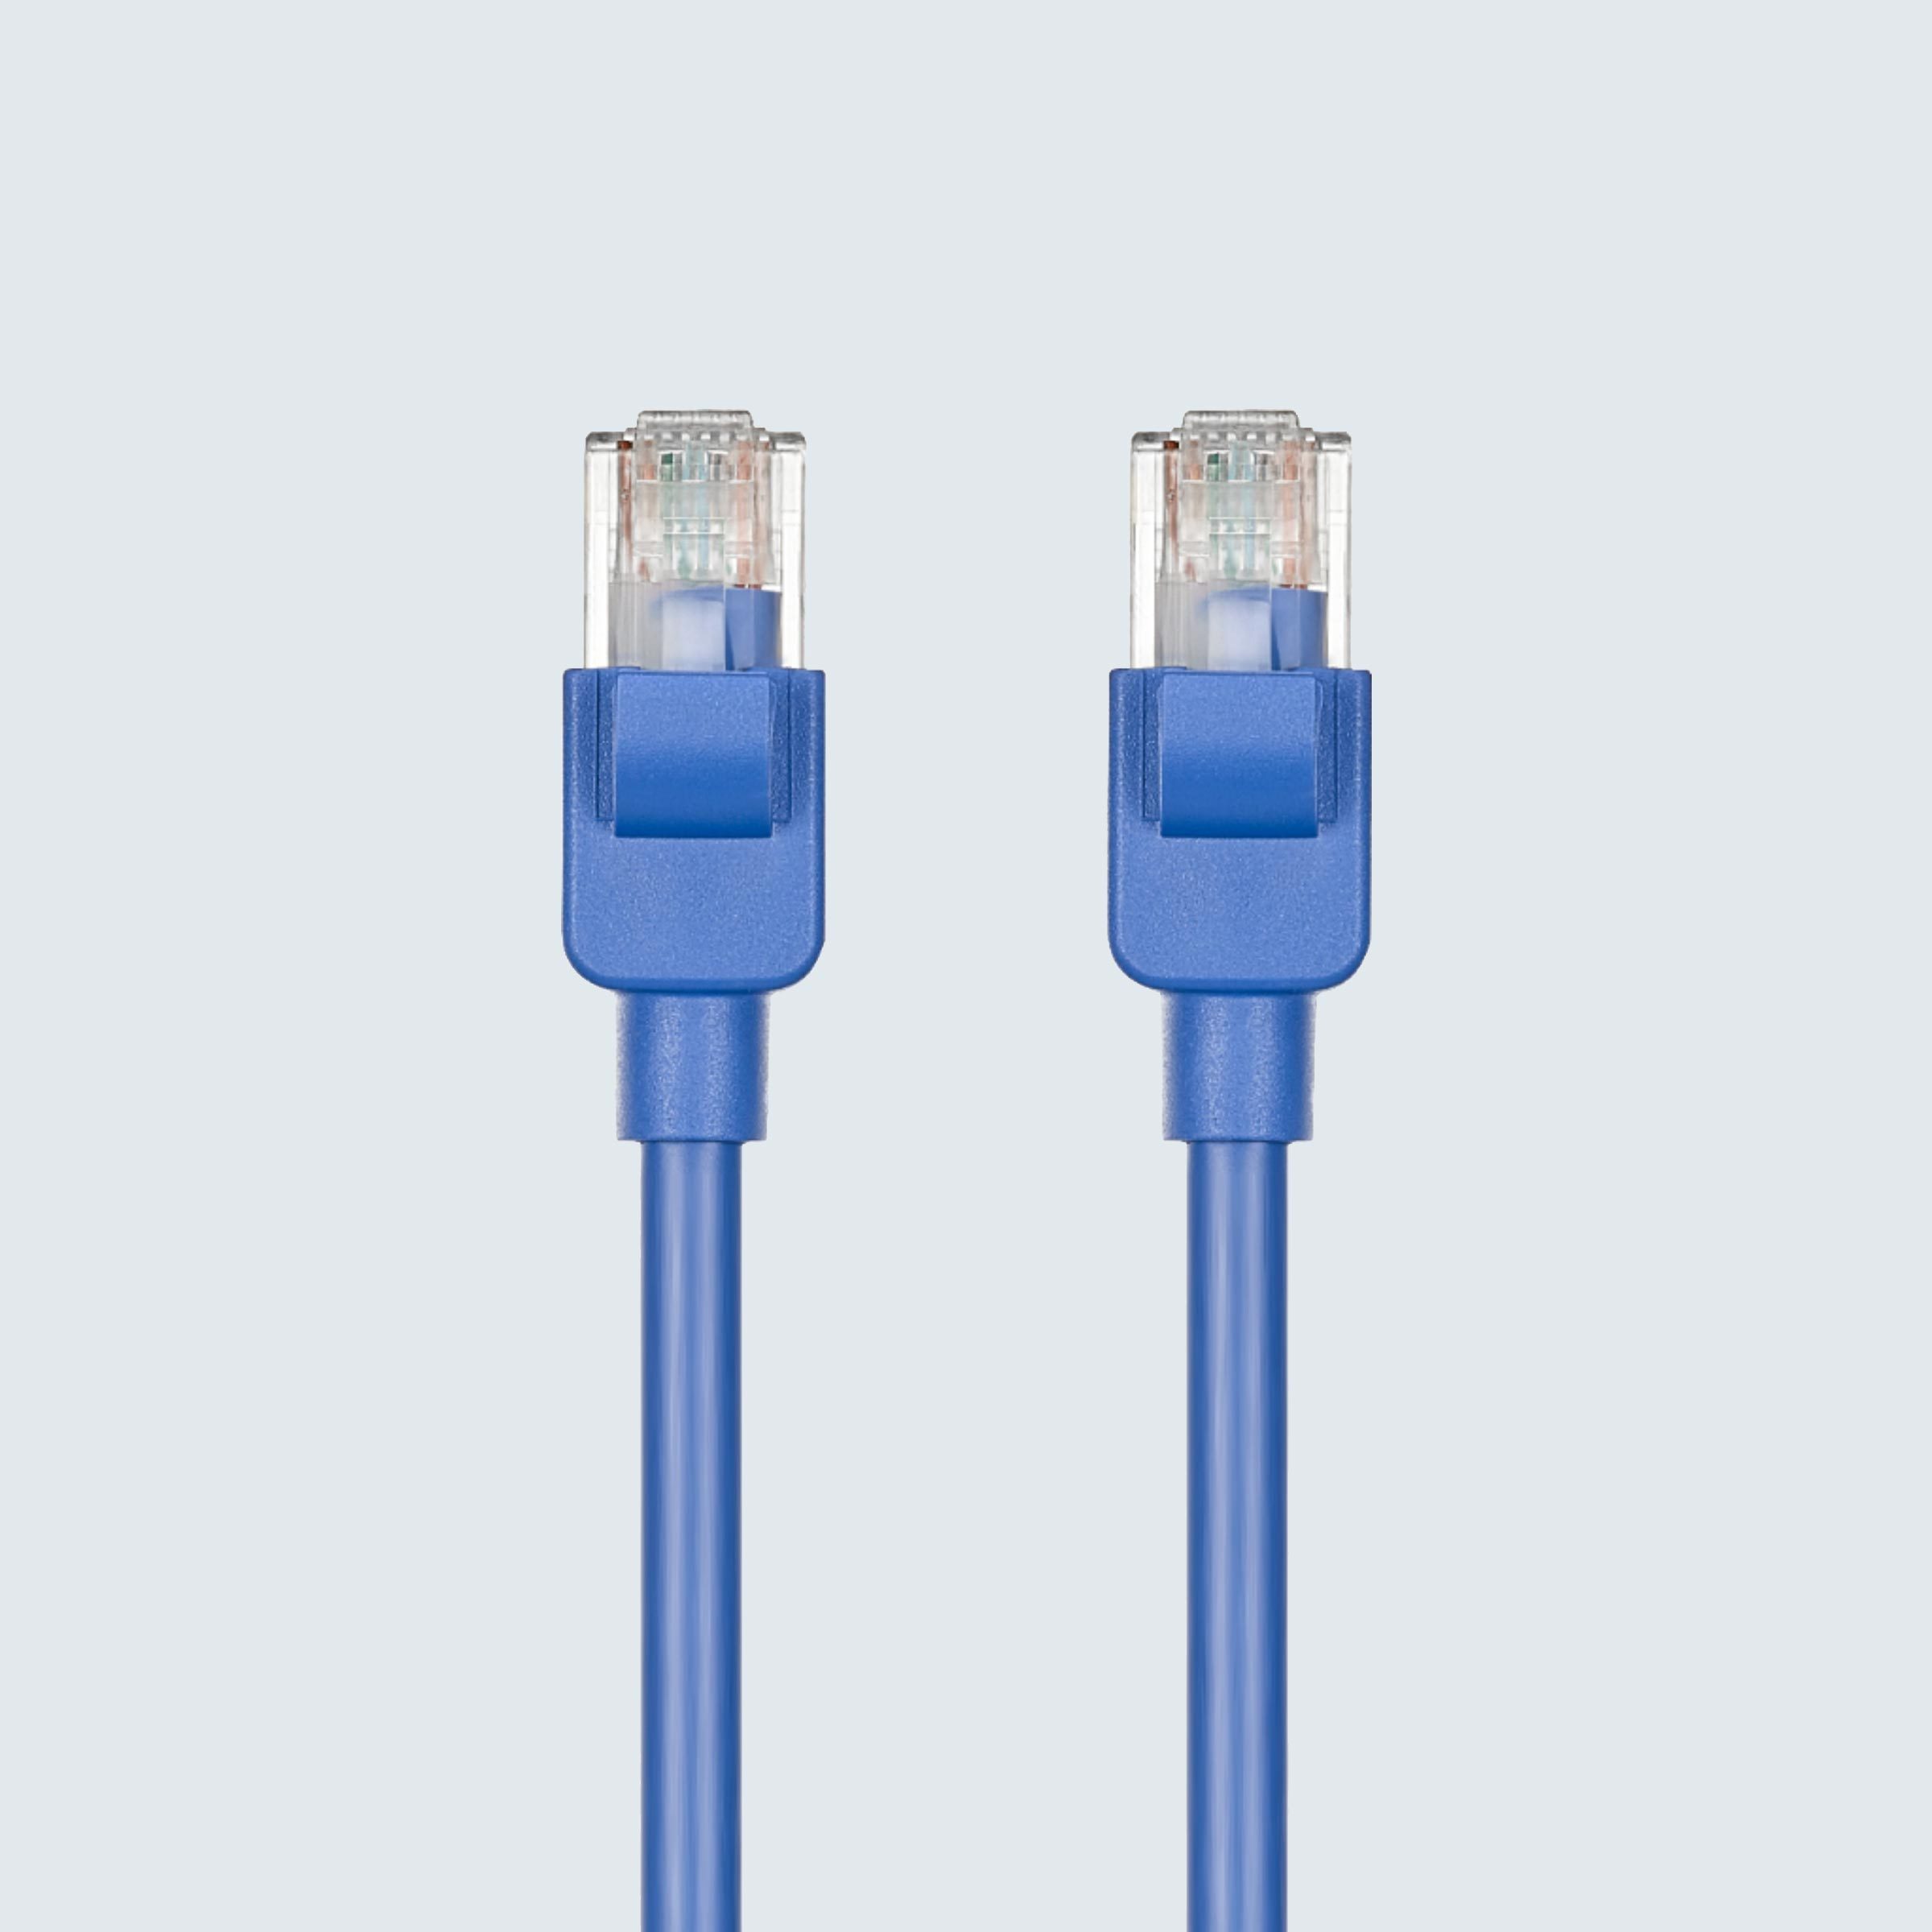 Ethernet cable